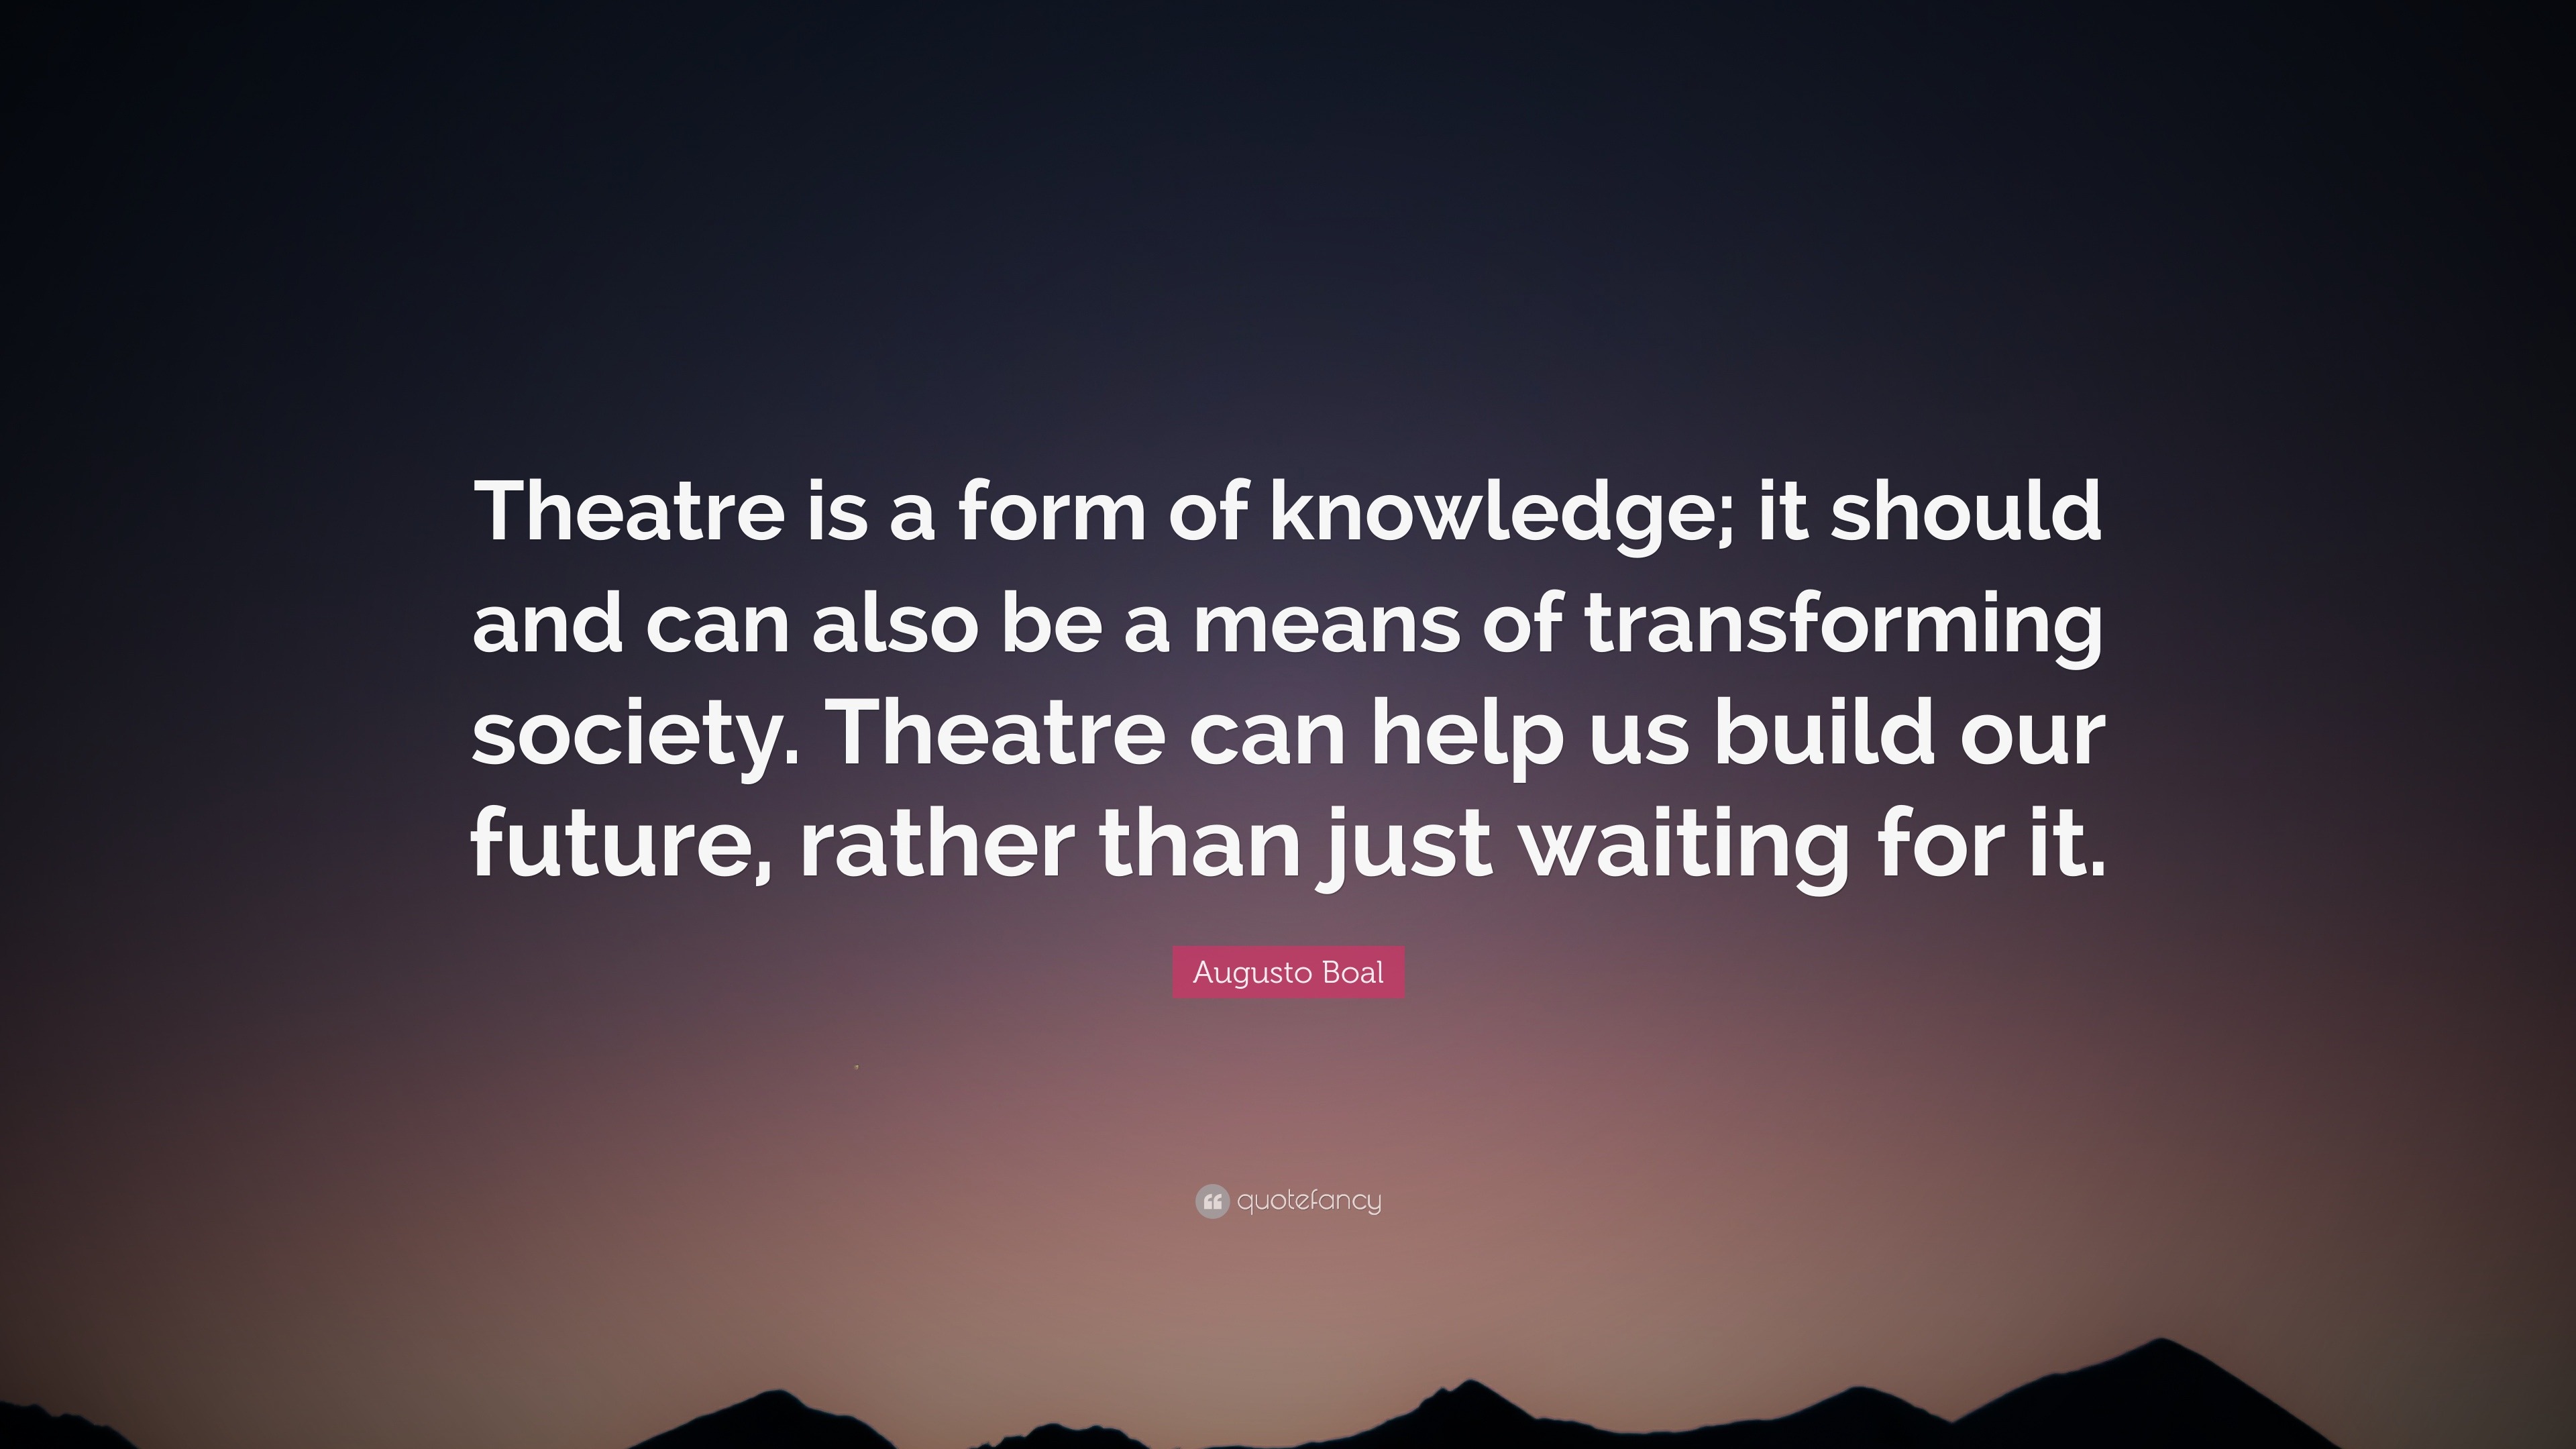 Augusto Boal Quote: “Theatre is a form of knowledge; it should and can